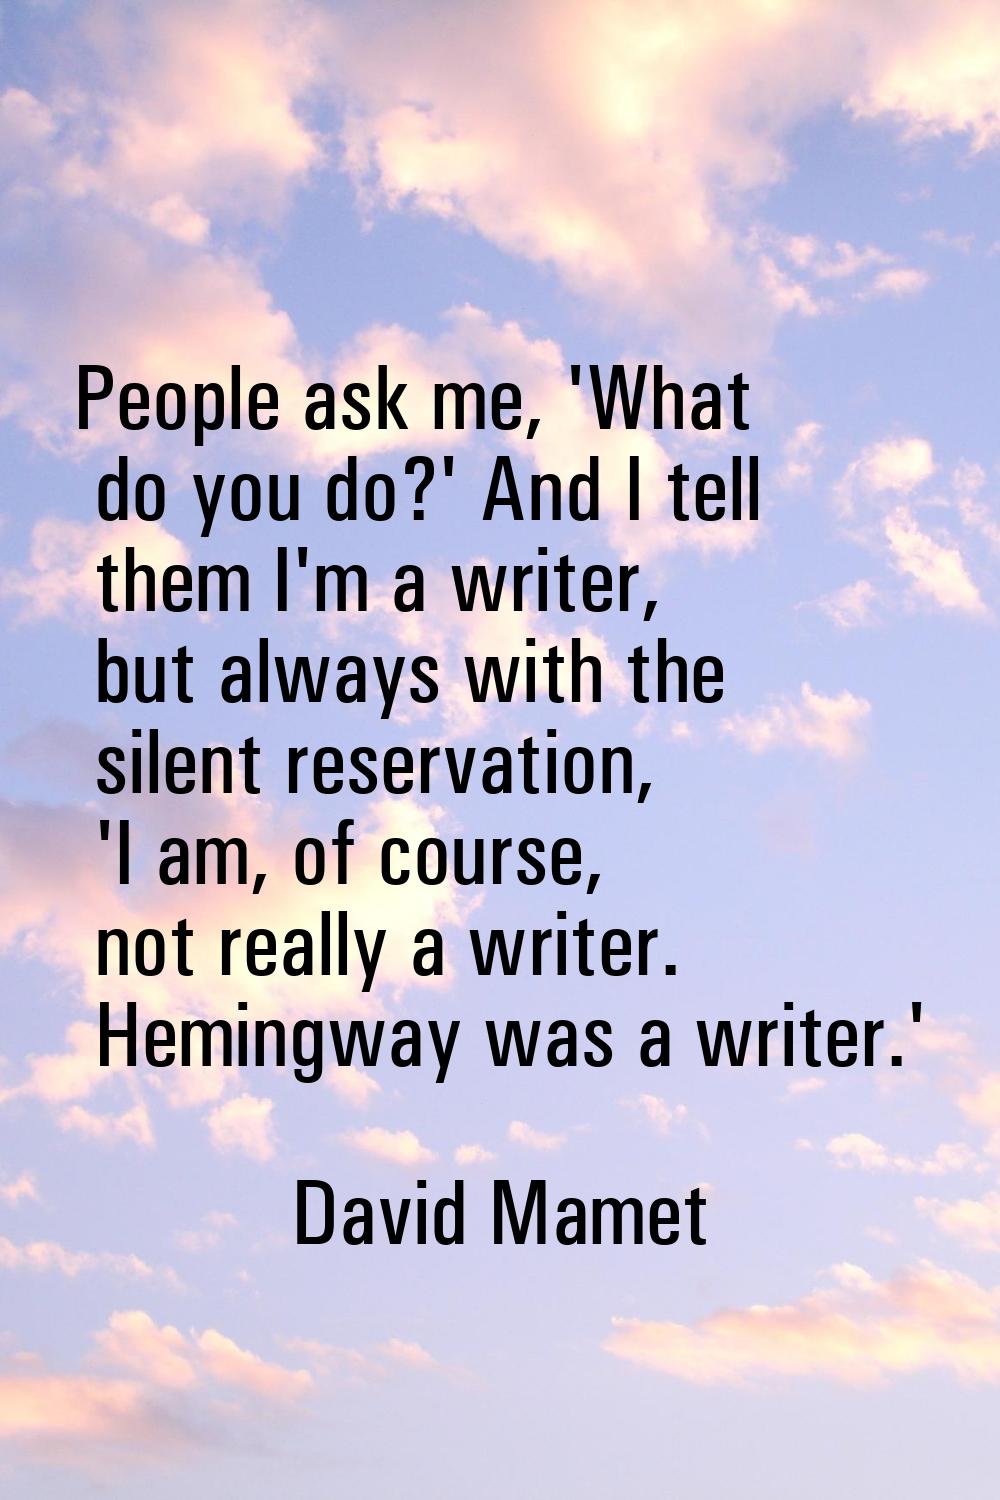 People ask me, 'What do you do?' And I tell them I'm a writer, but always with the silent reservati